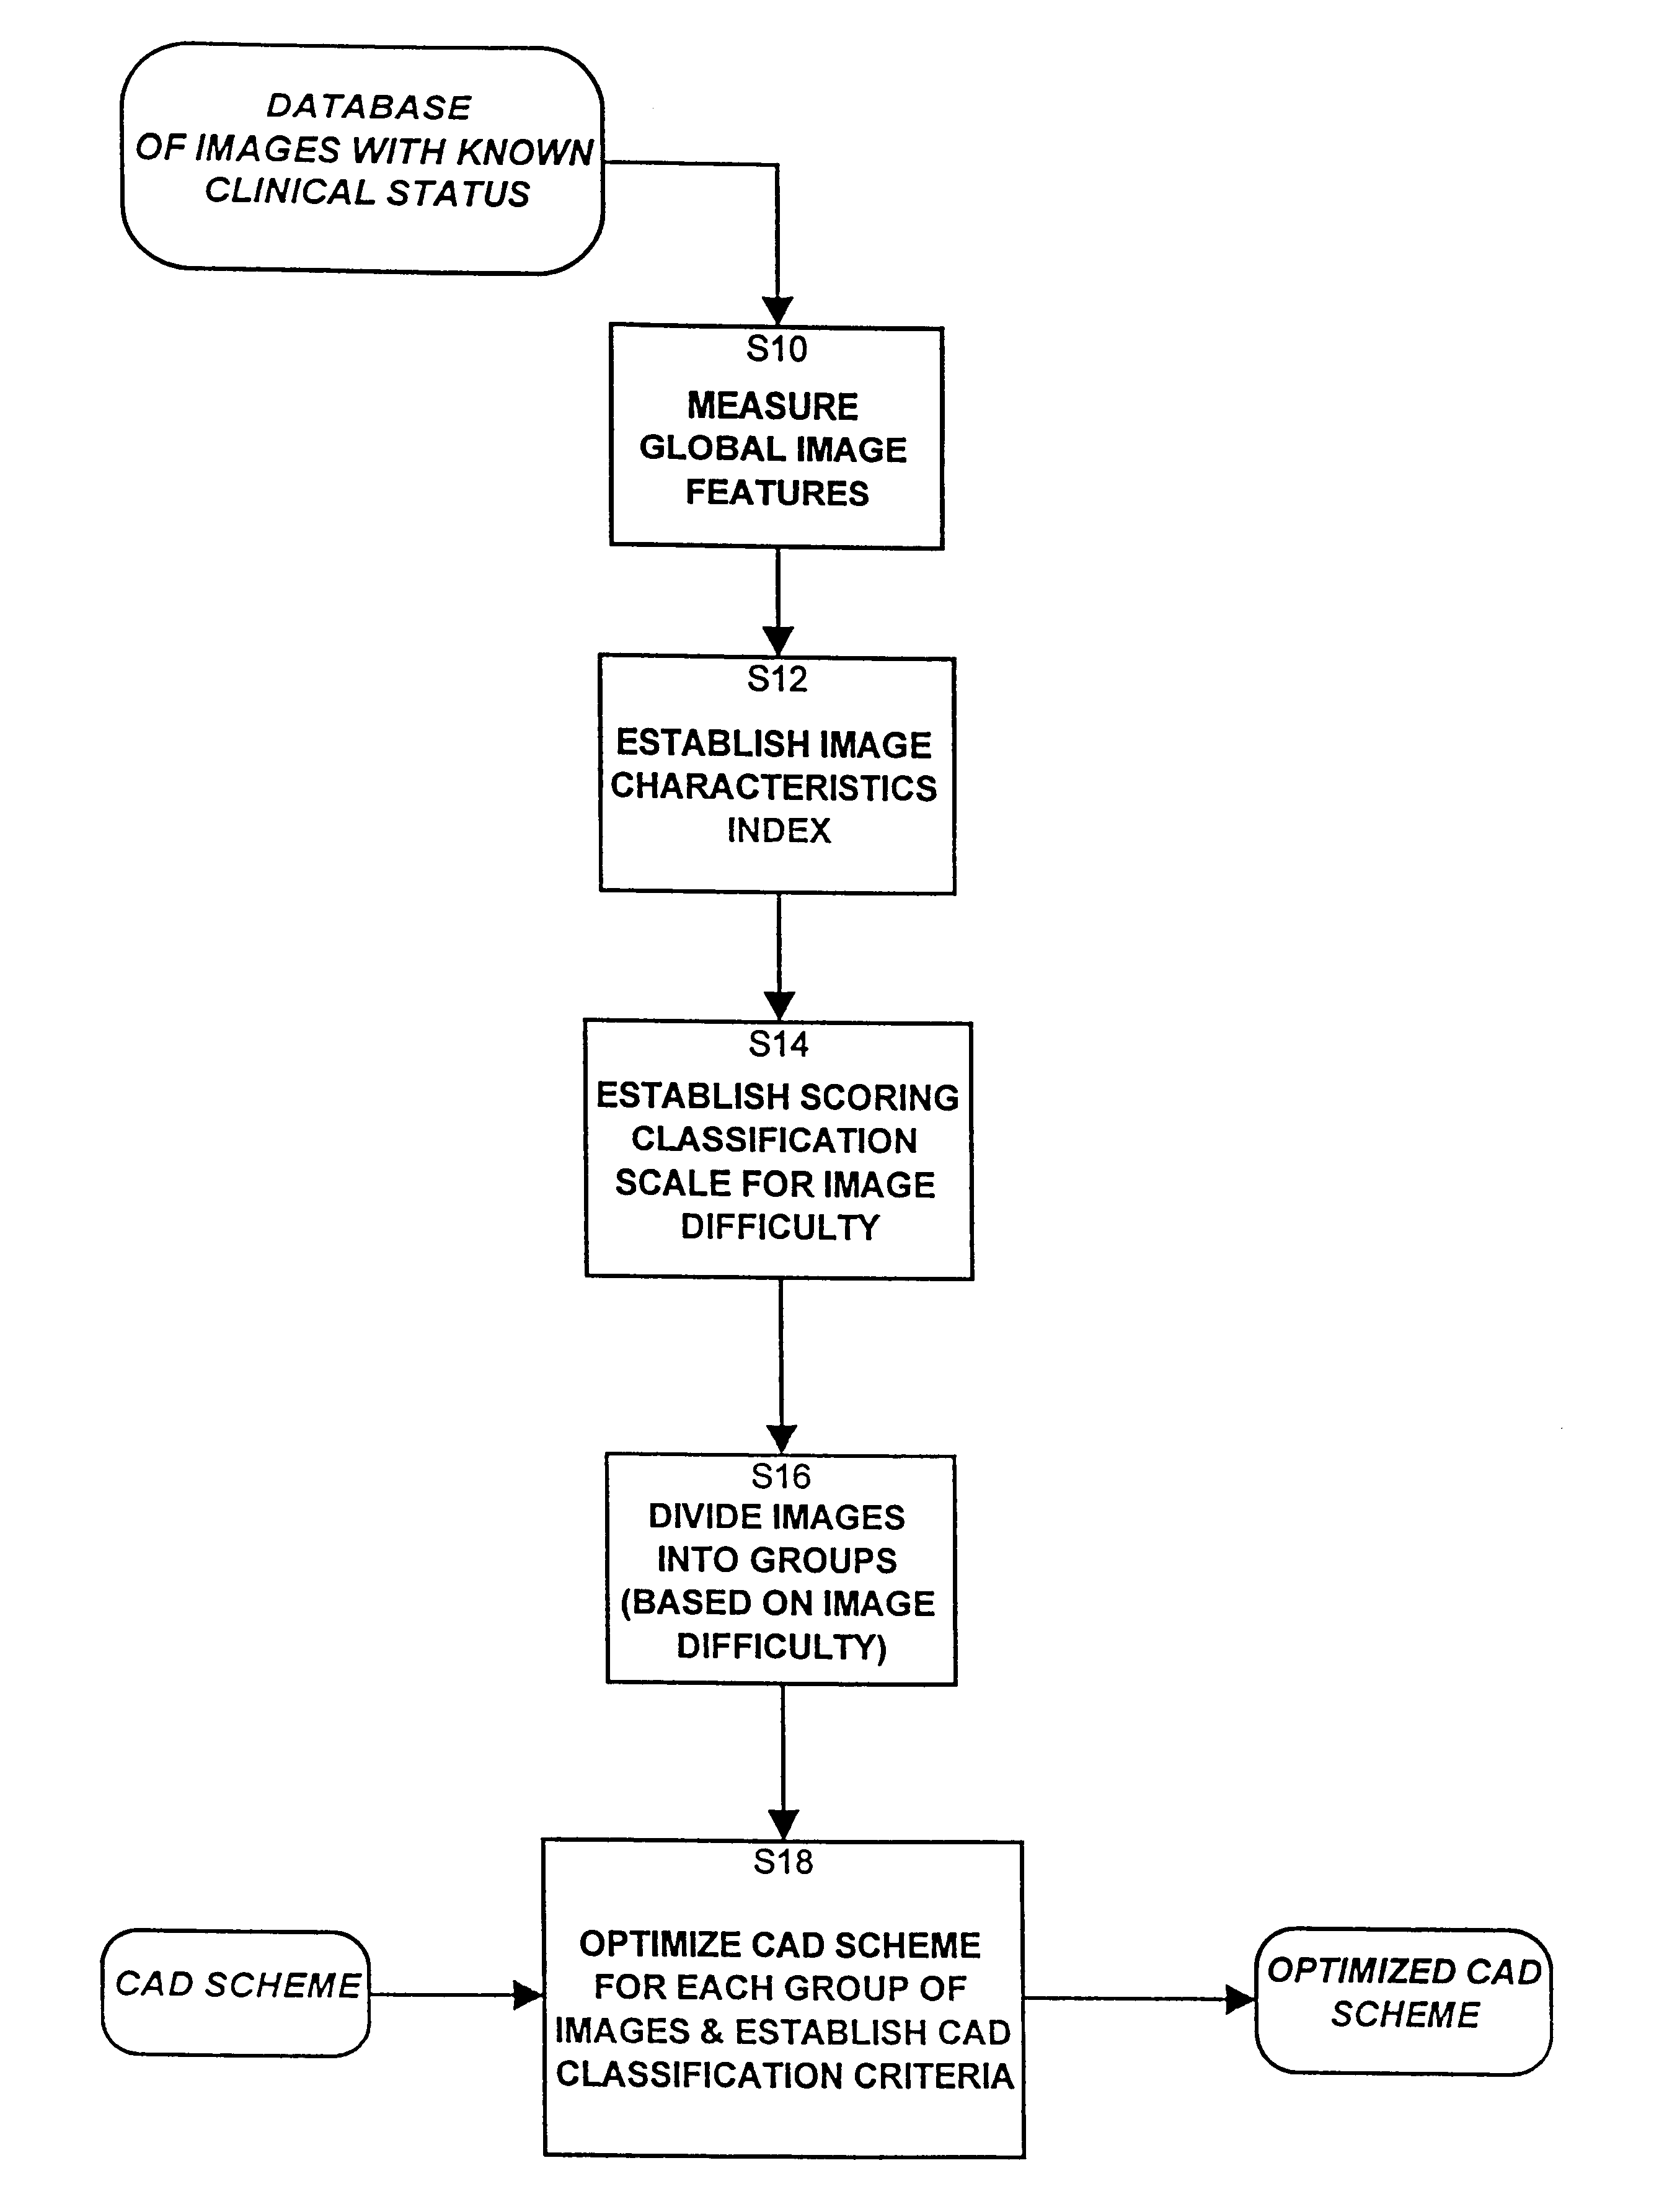 Image quality based adaptive optimization of computer aided detection schemes